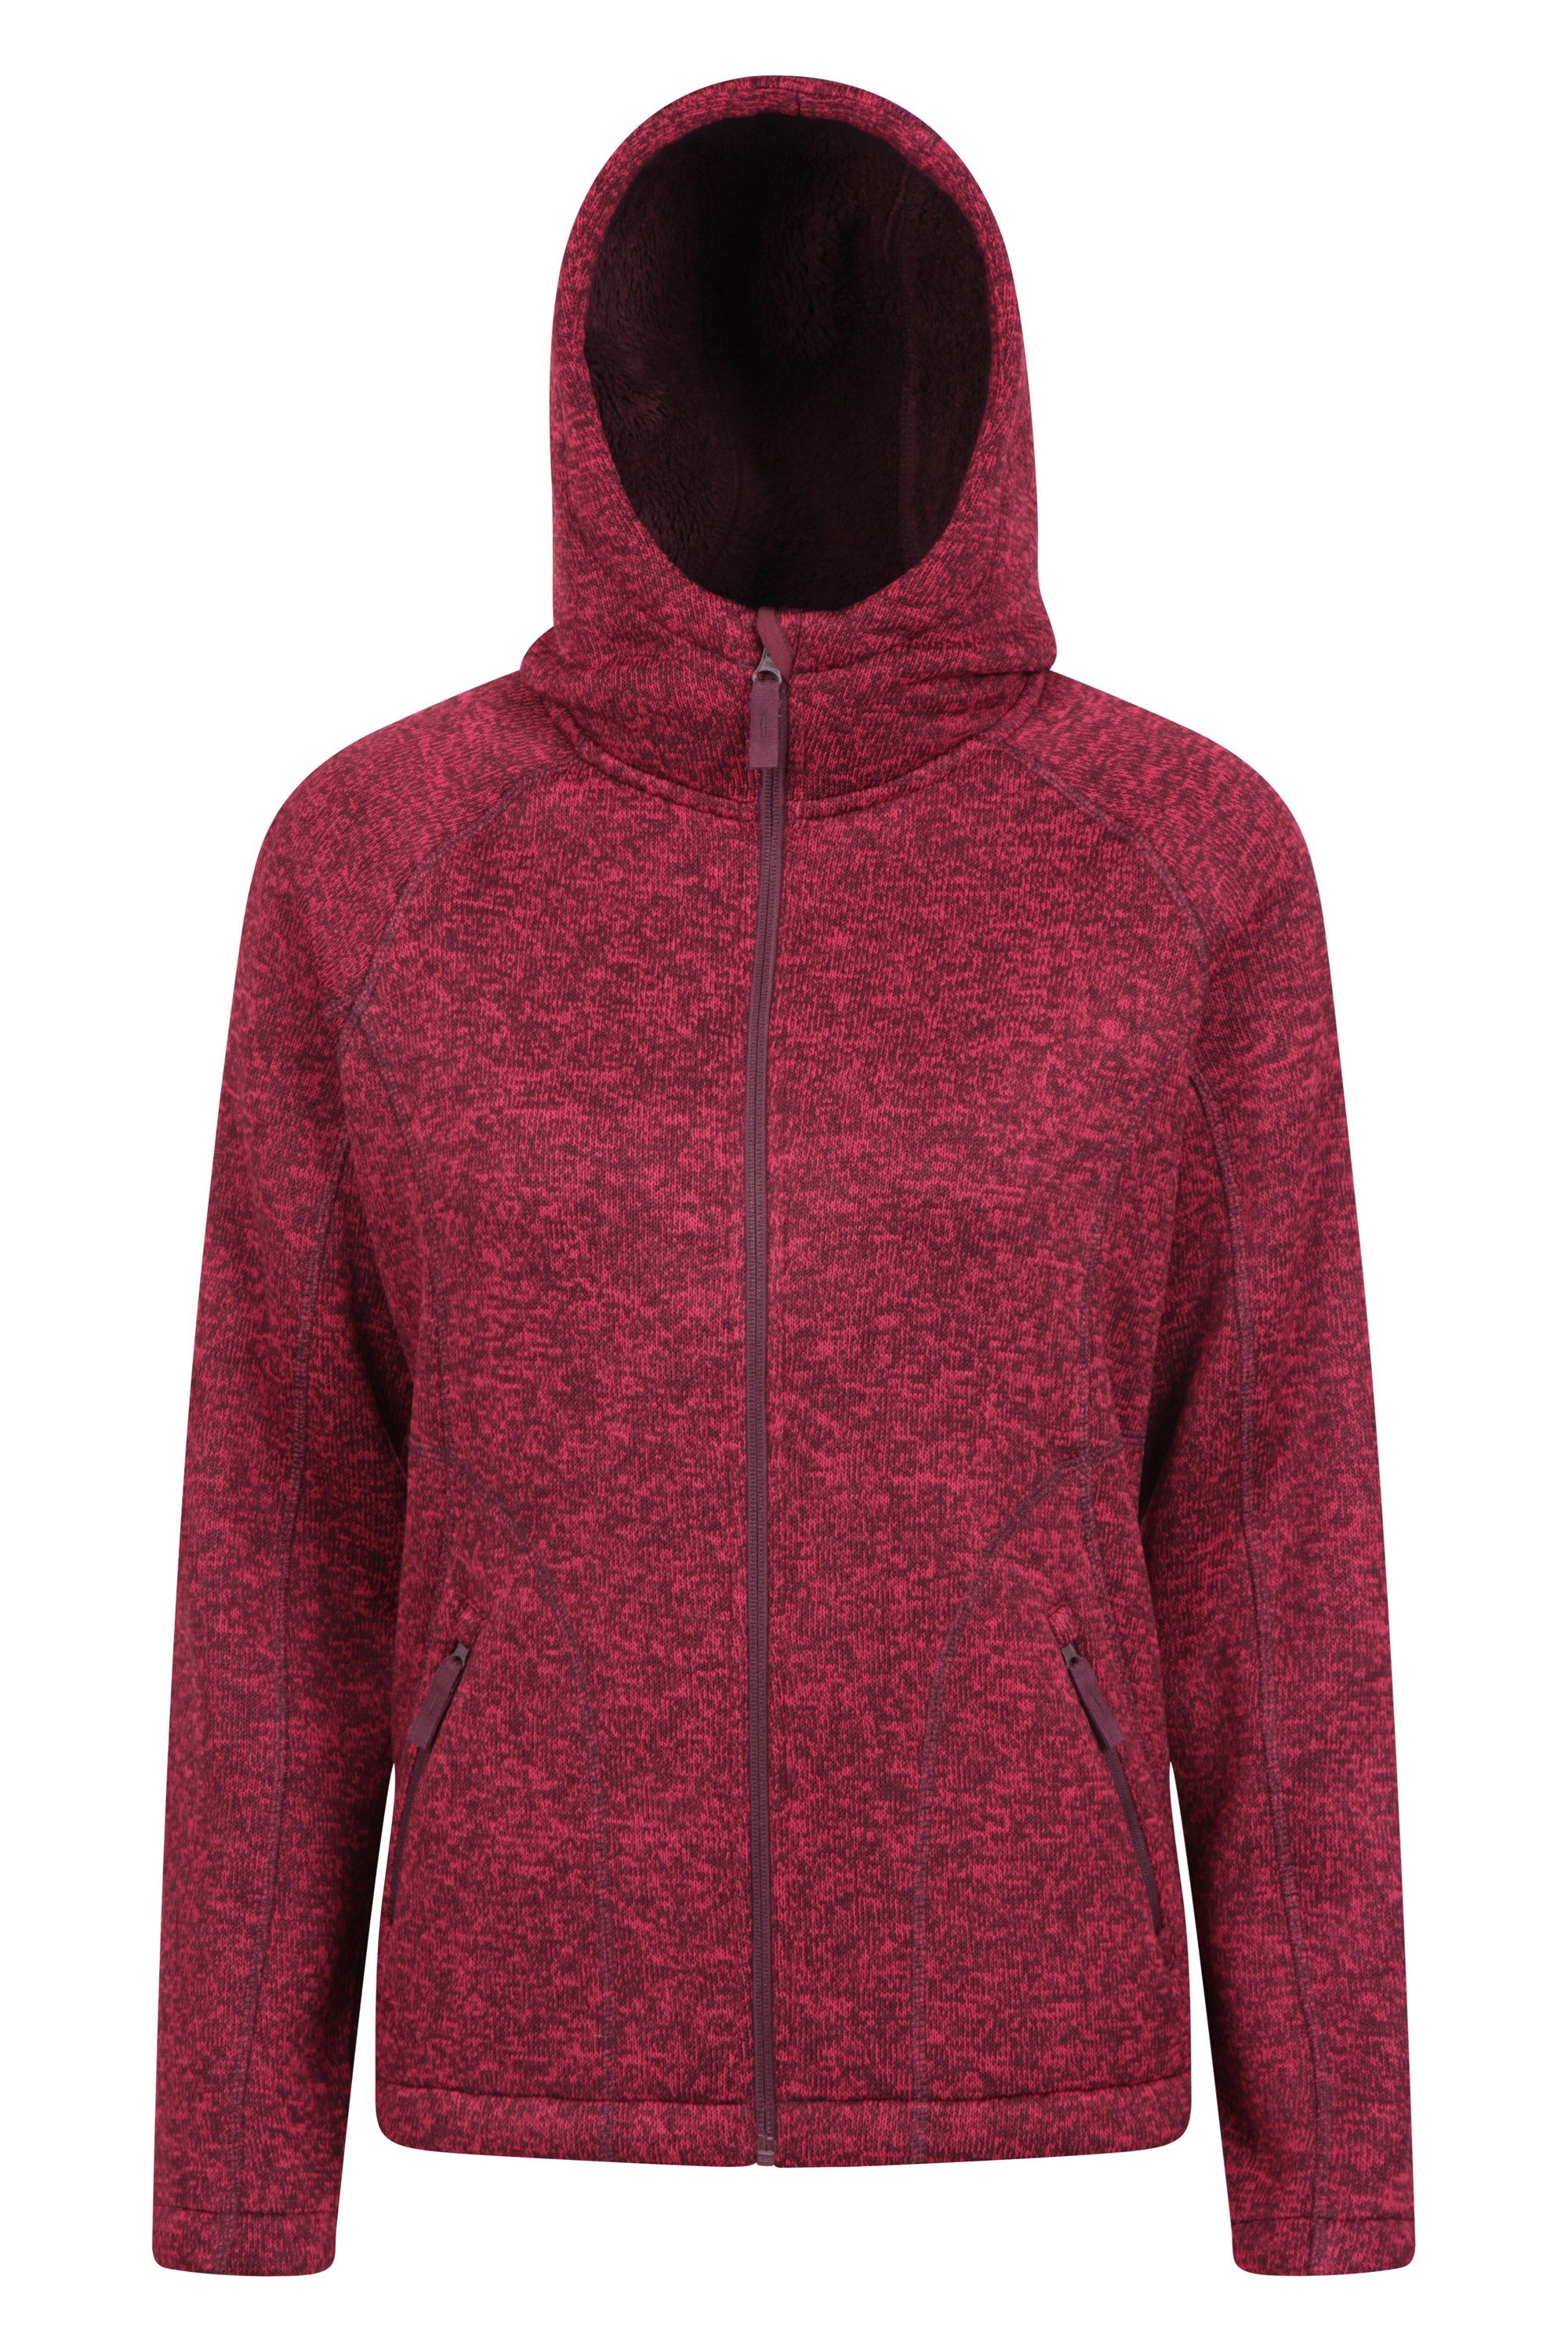 Mountain Warehouse Wms Explore Embroidered Womens Hoodie 